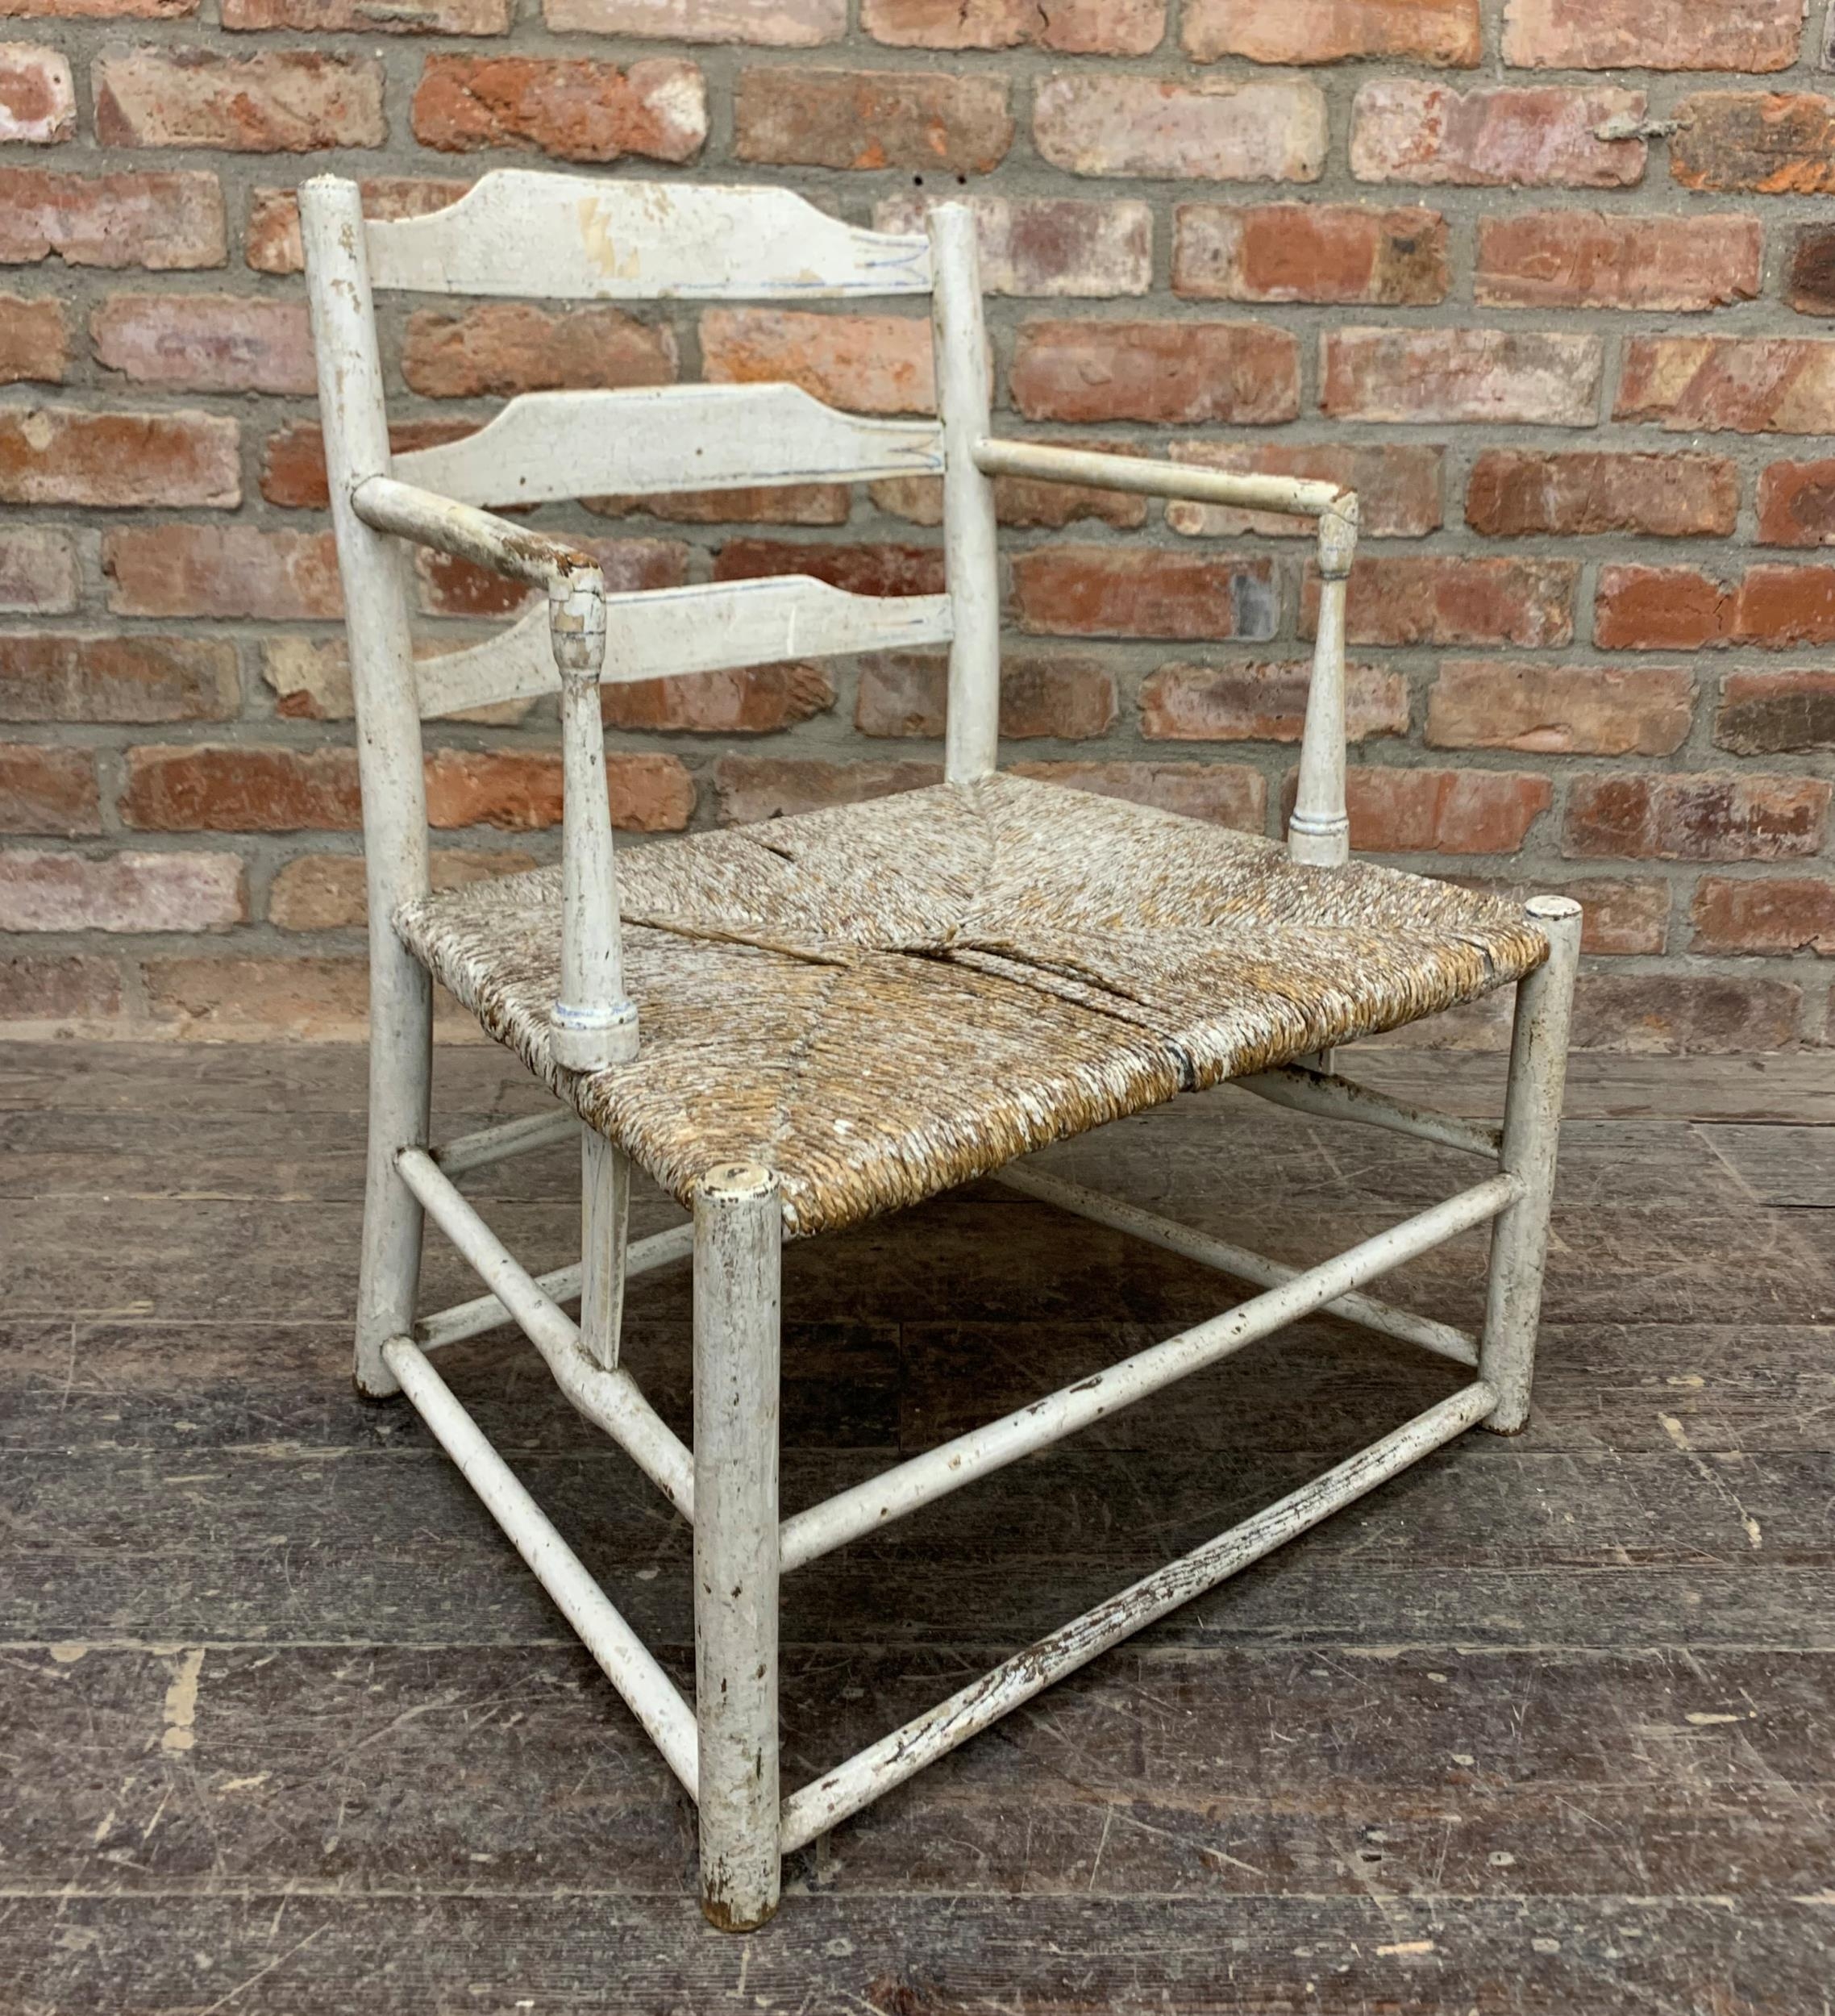 Good early Scandinavian primitive low nursing chair with painted ladder back and cord strung seat